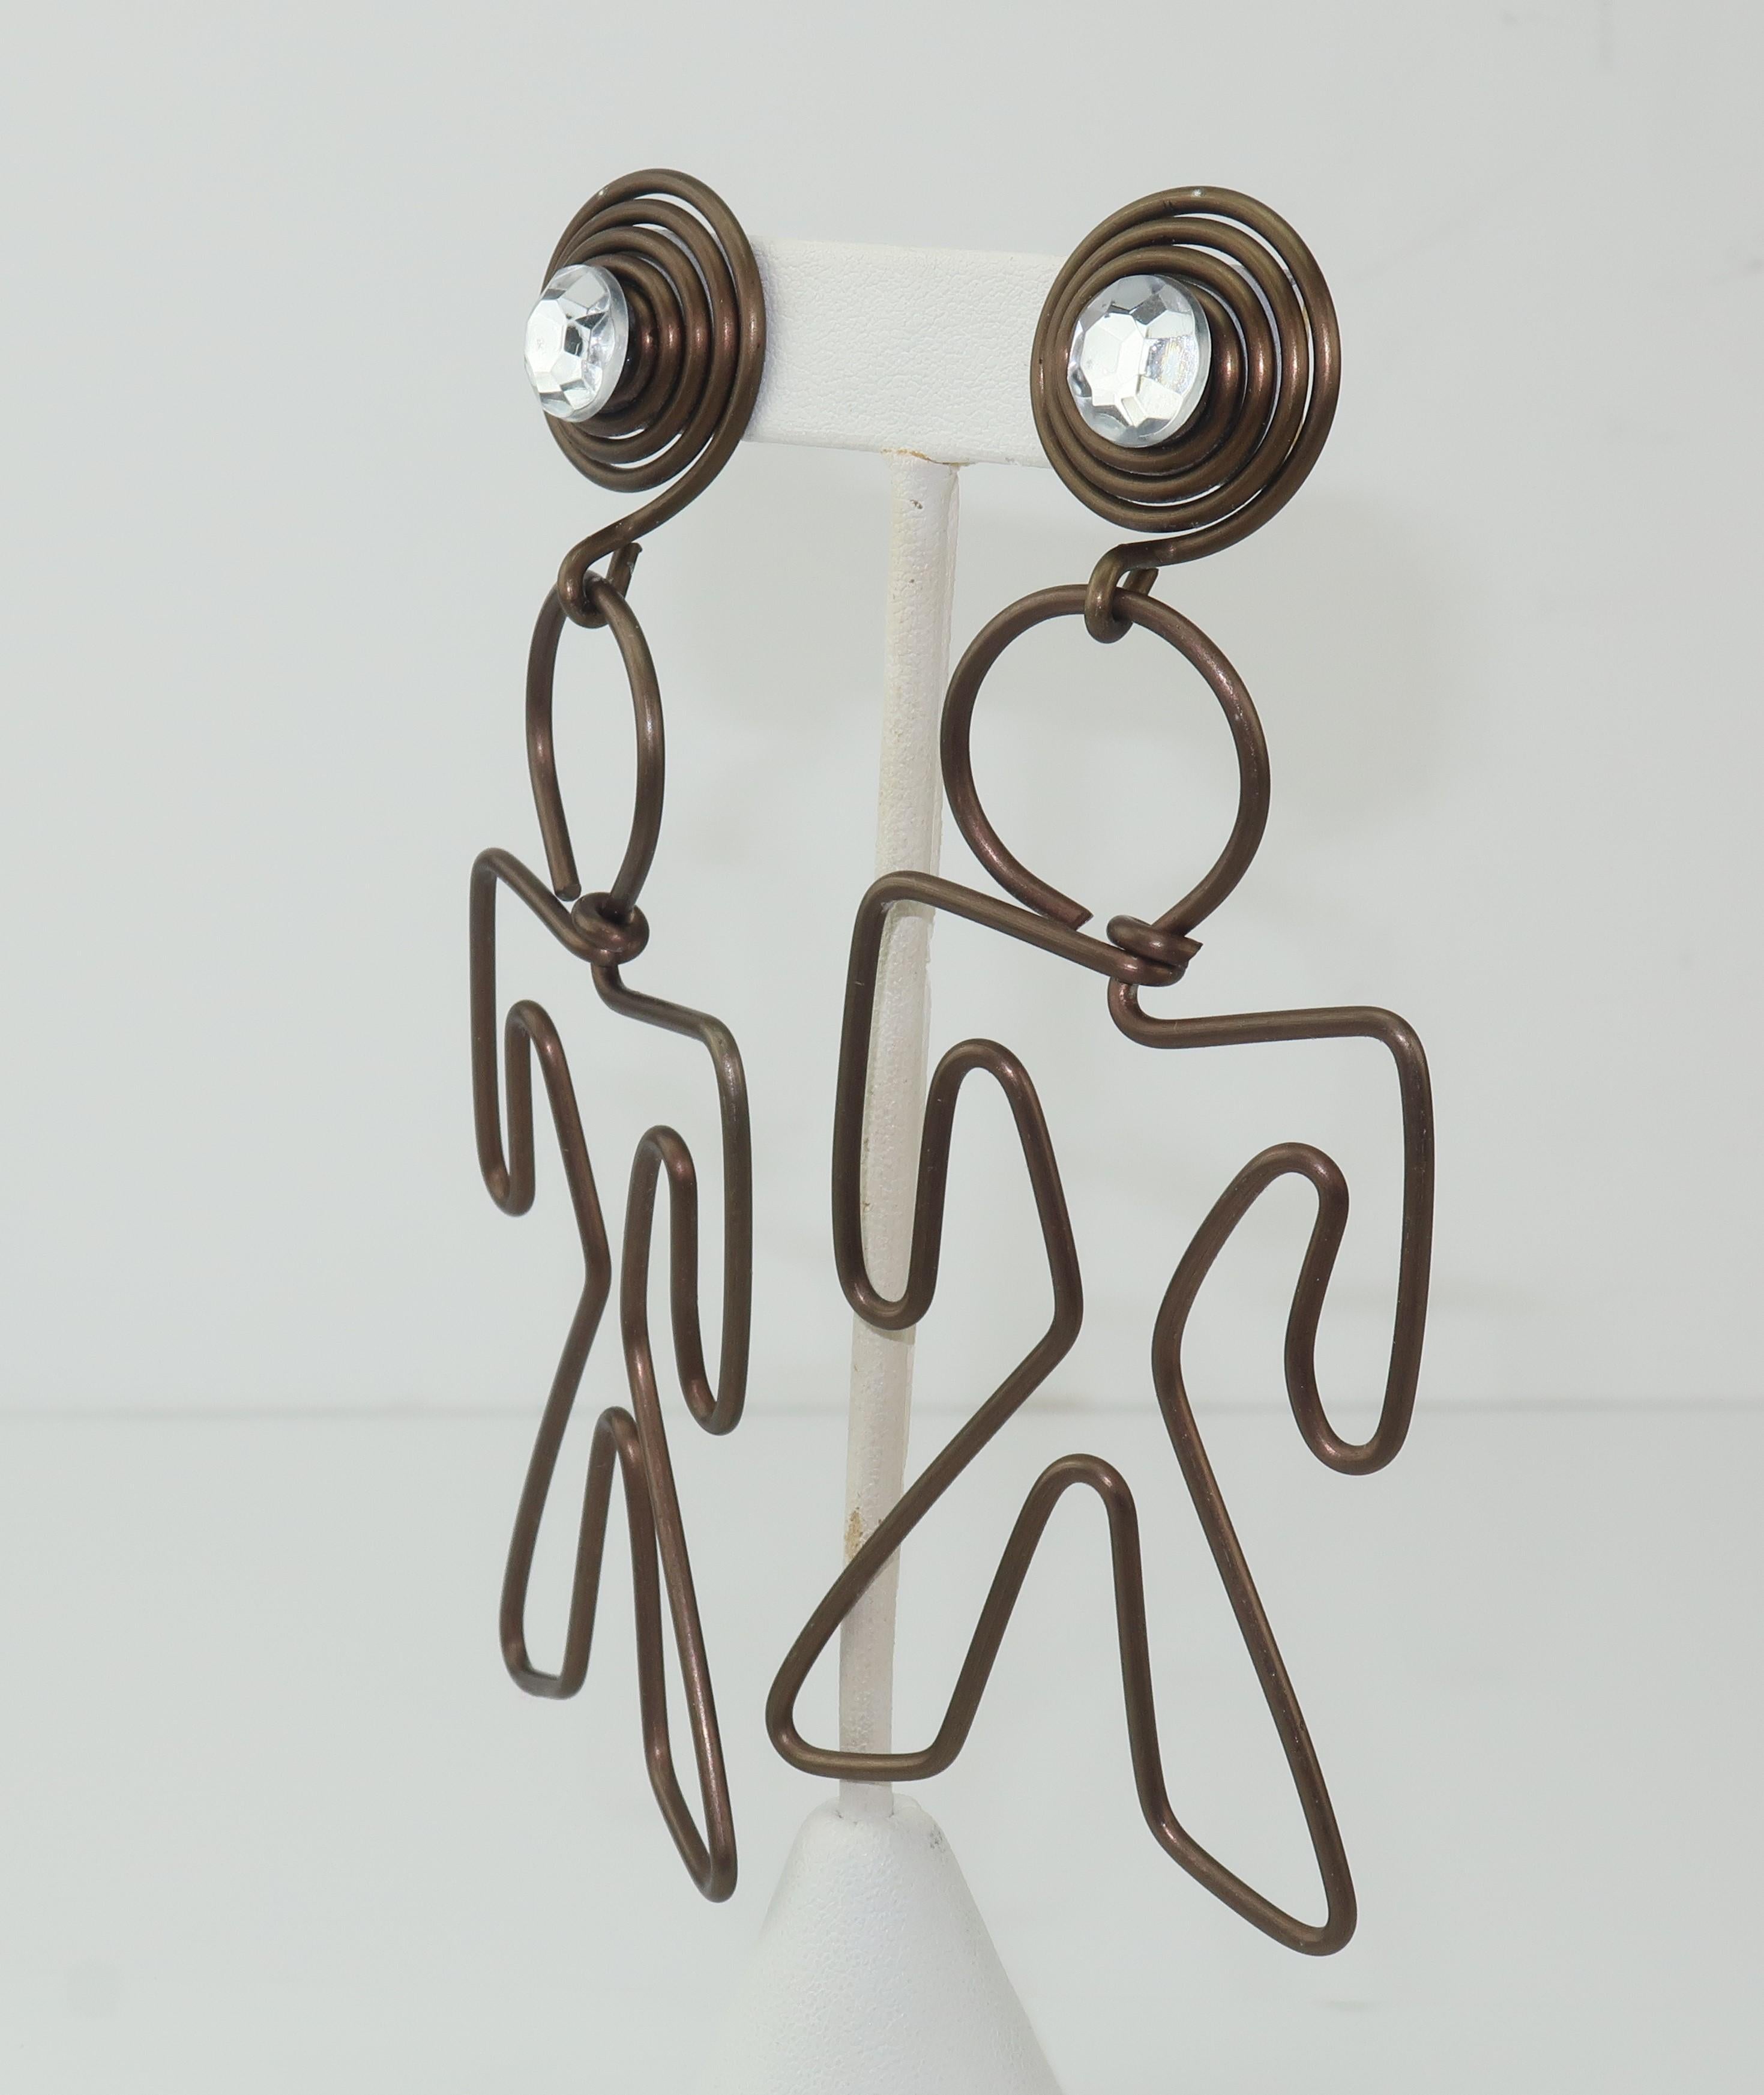 Large whimsical bronzed finish wire figural earrings accented by mirrored back rhinestones with pierced post backs.  Perfect for adding a unique look.  Artisan made though unsigned.  Very good condition with a little loss of bronze finish as shown